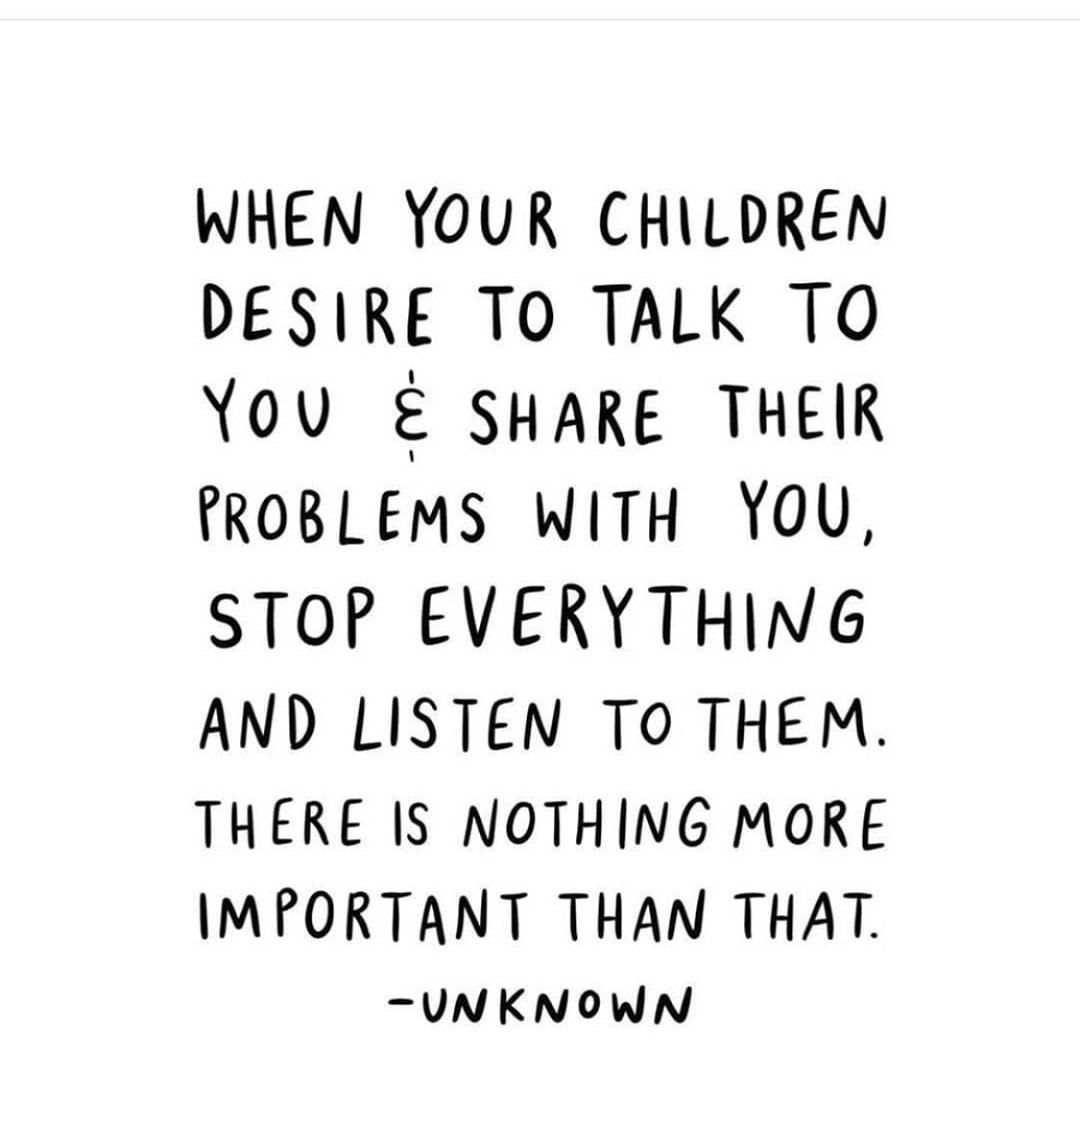 When your children desire to talk to you é share their problems with you, stop everything and listen to them. There is nothing more important than that.